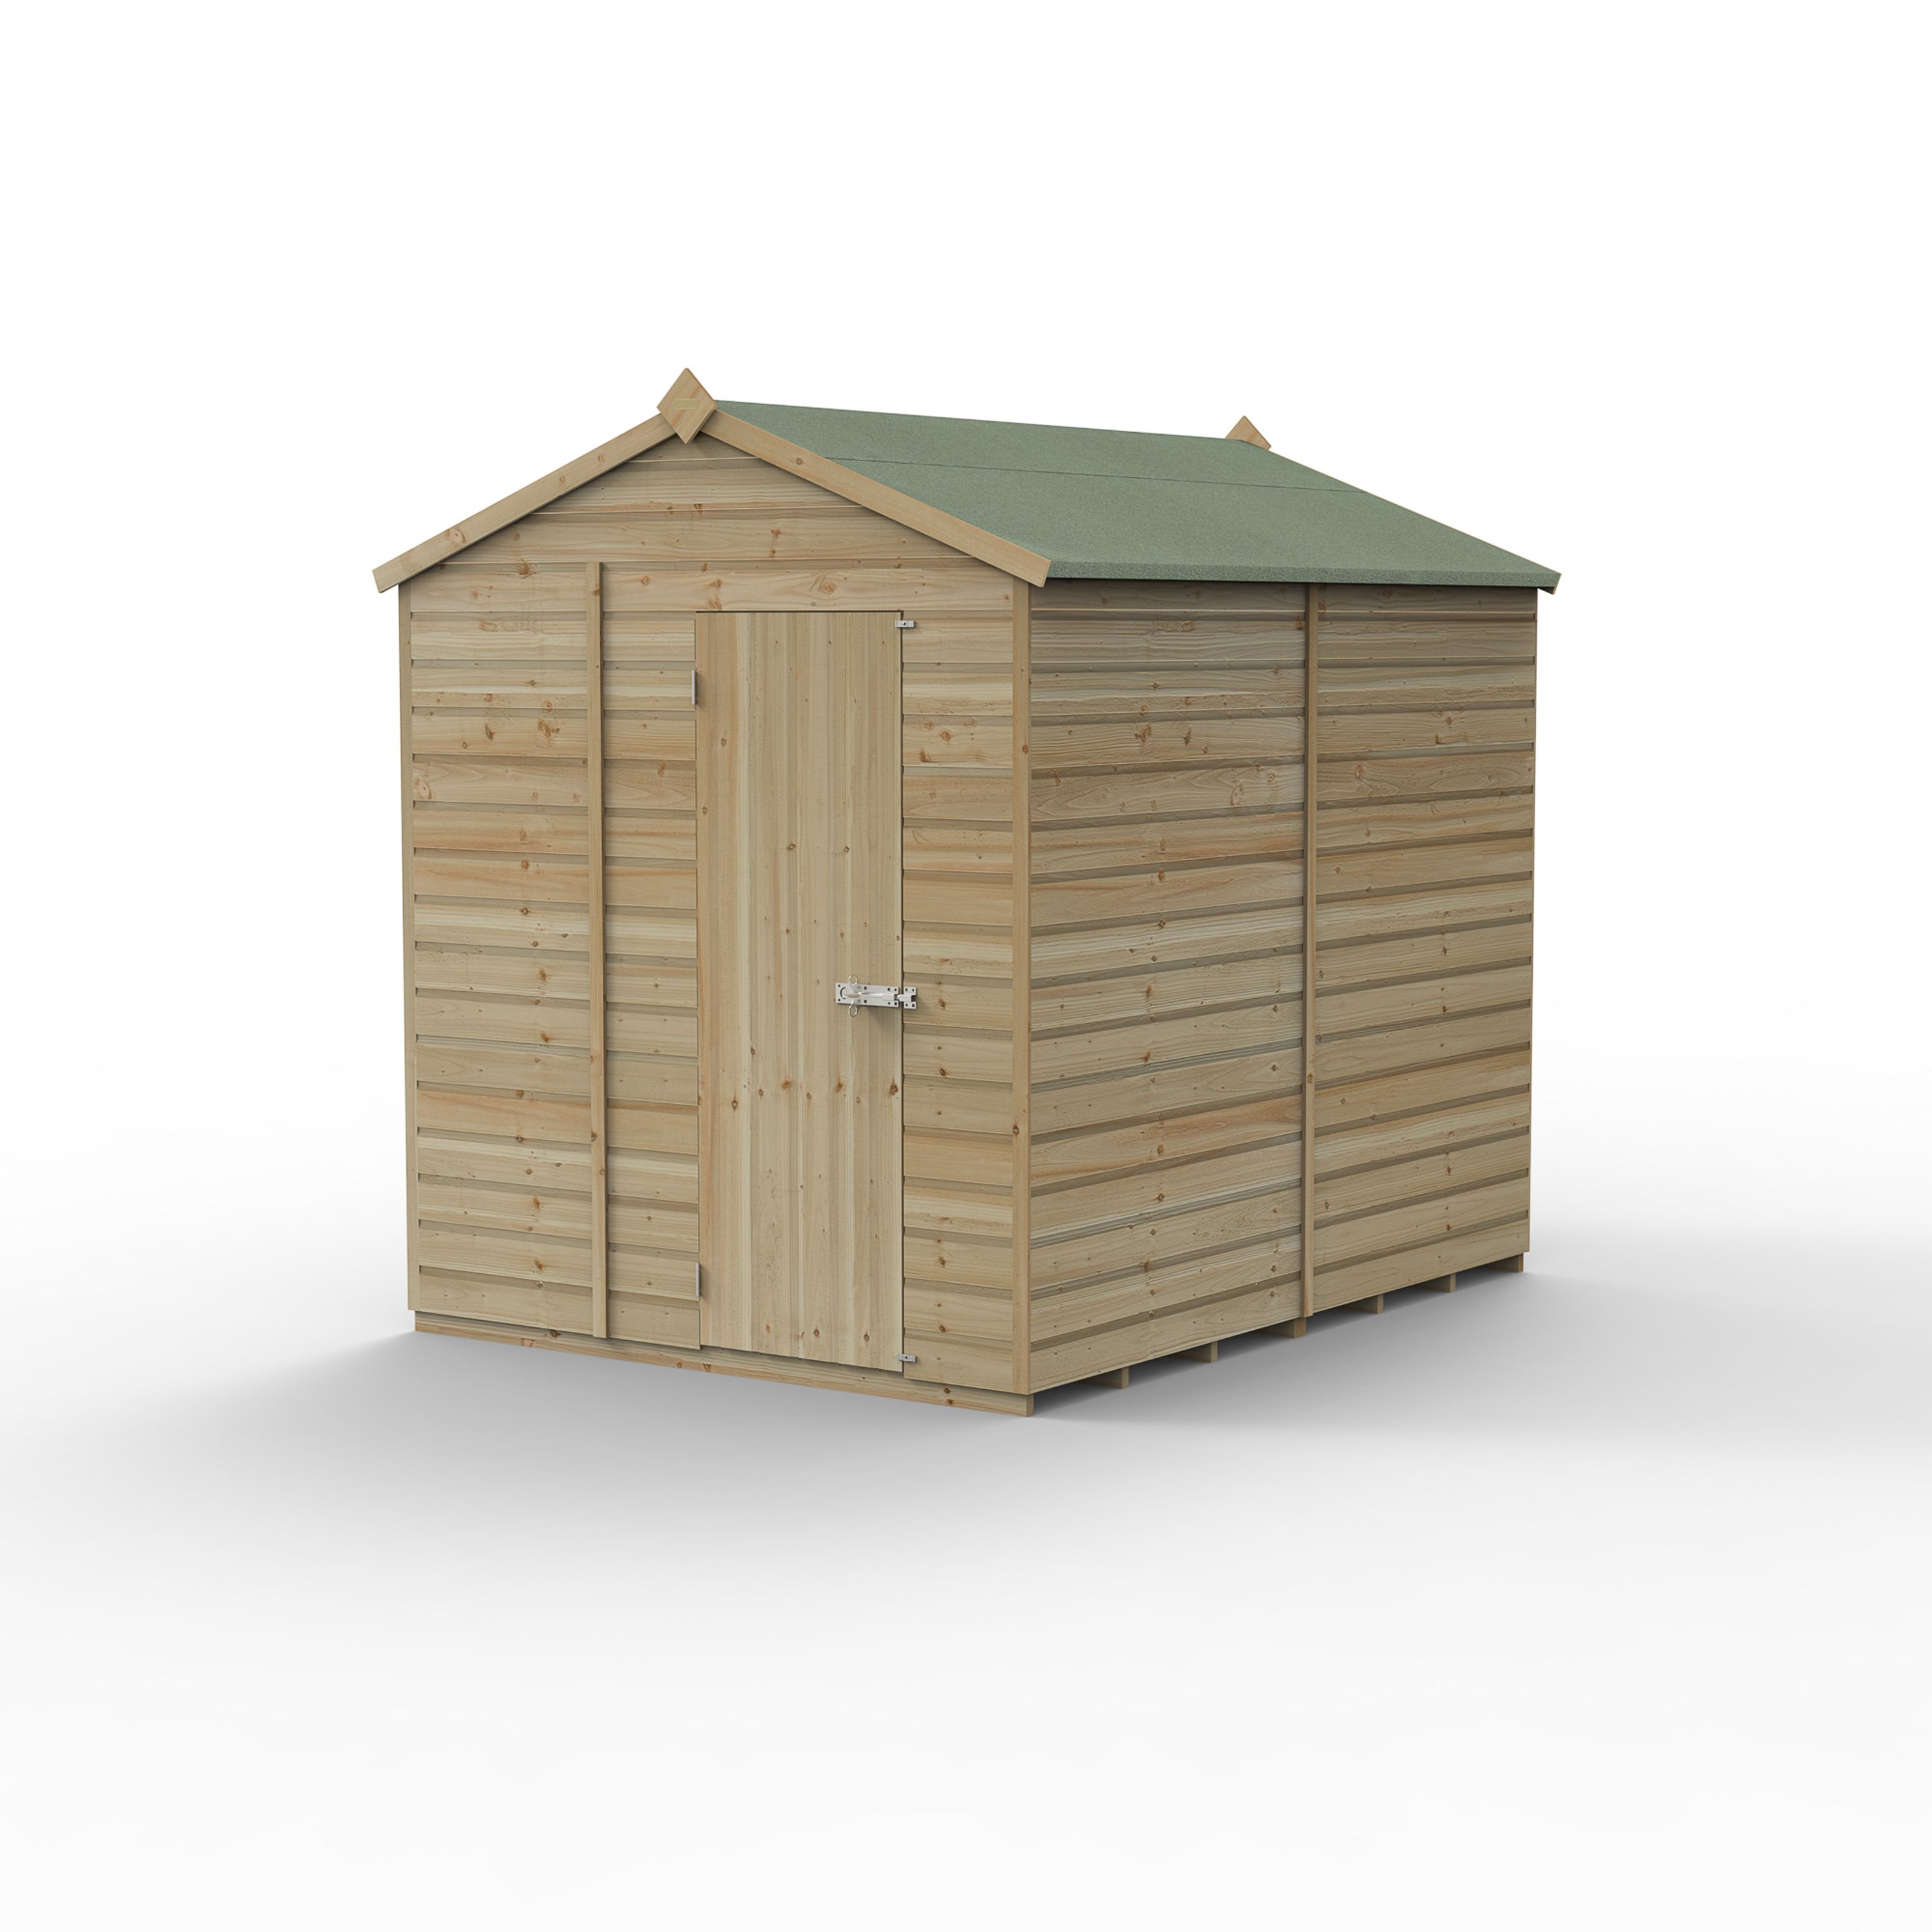 Forest Garden Beckwood 8x6 ft Apex Natural timber Wooden Shed with floor - Assembly not required